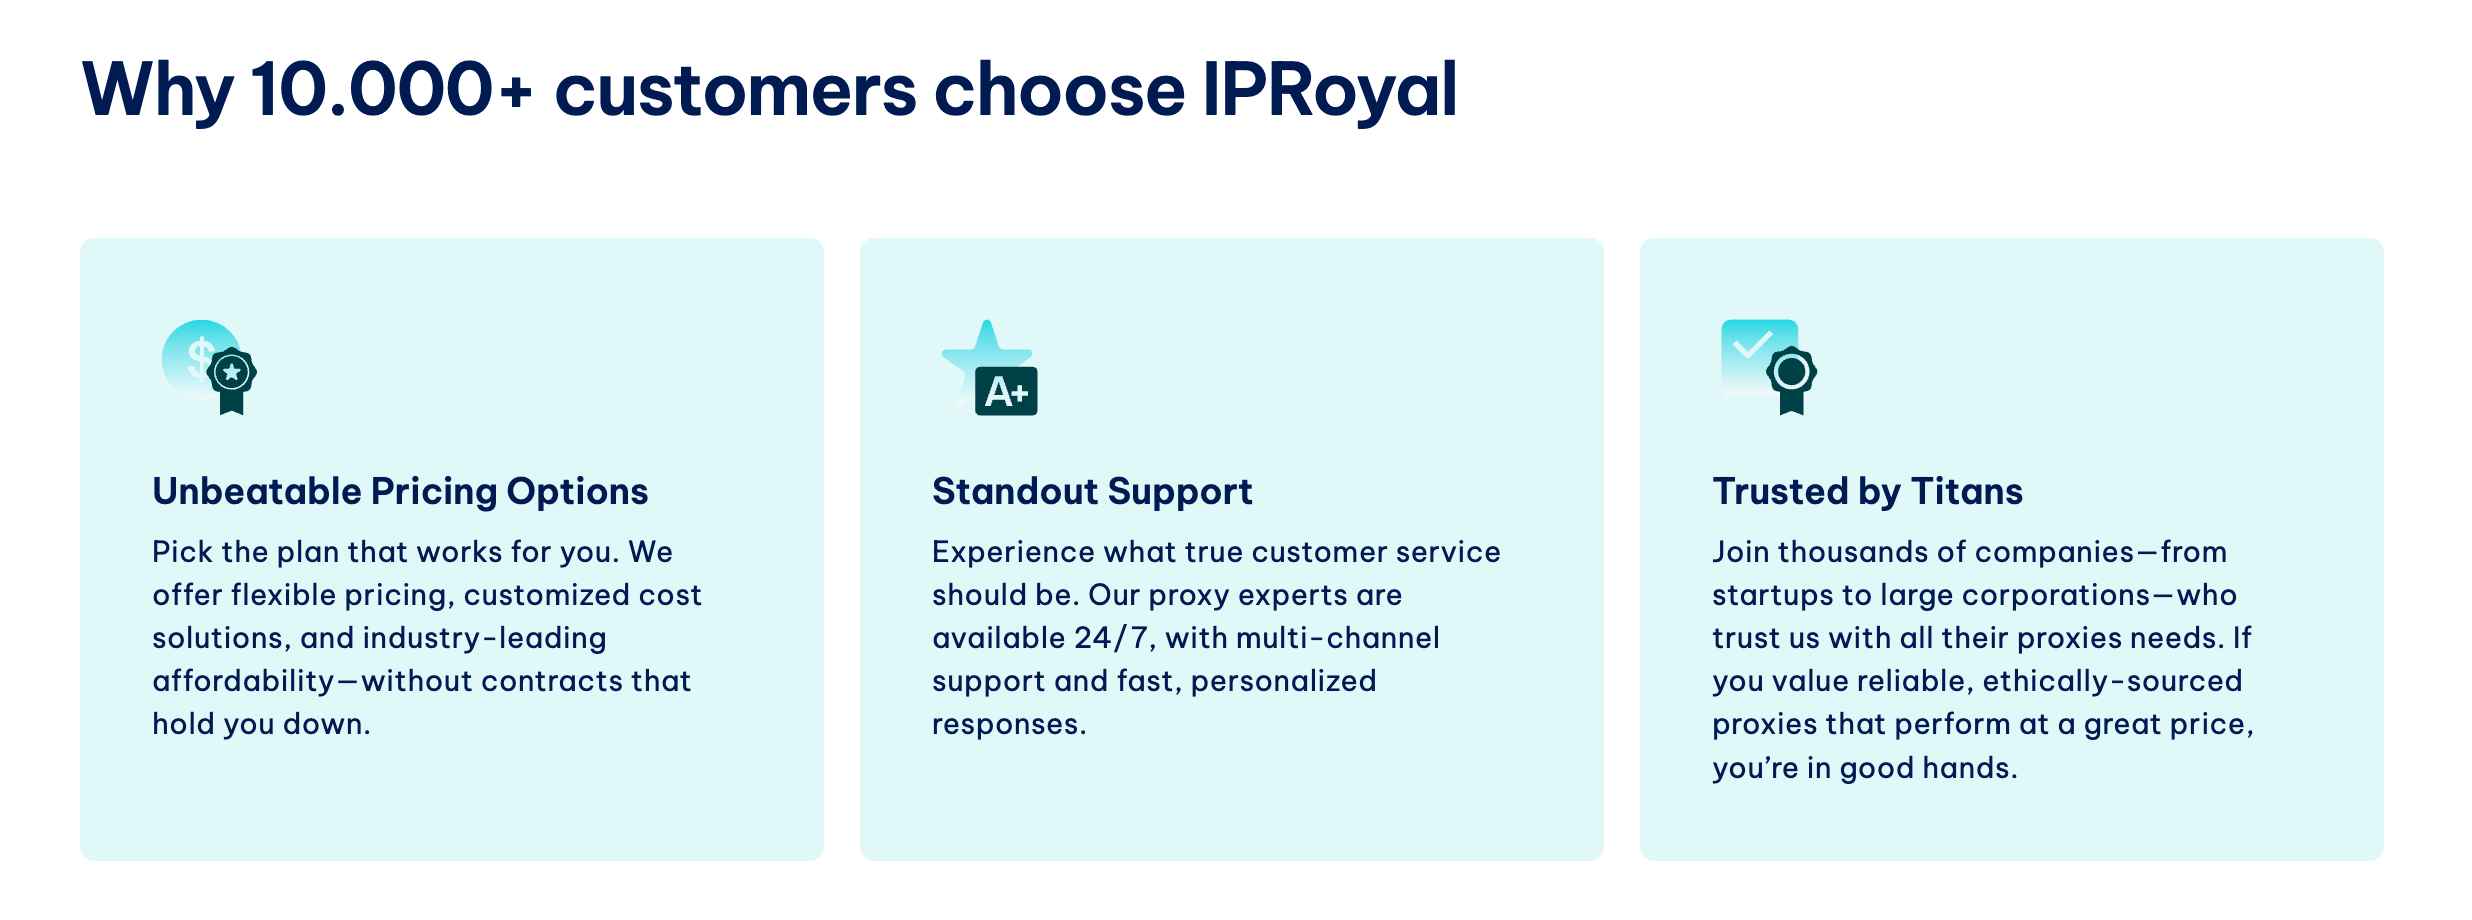 IPRoyal Ease of Use and Interface